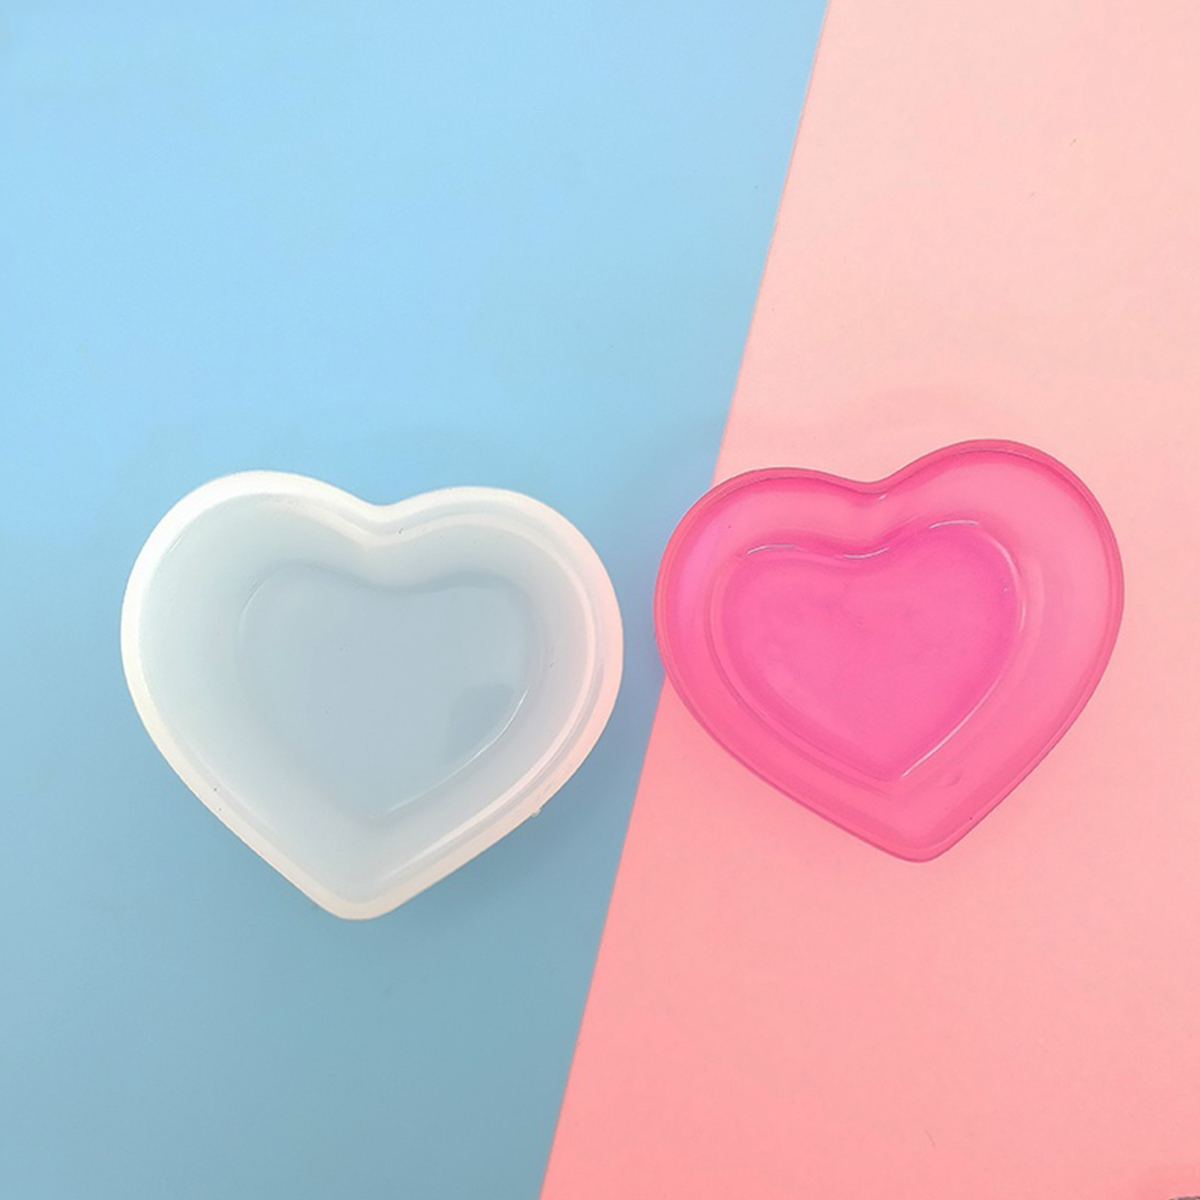 DIY-Resin-Casting-Molds-Heart-Square-Round-Shape-Mod-Clear-Silicone-Craft-Making-Mould-1526984-8